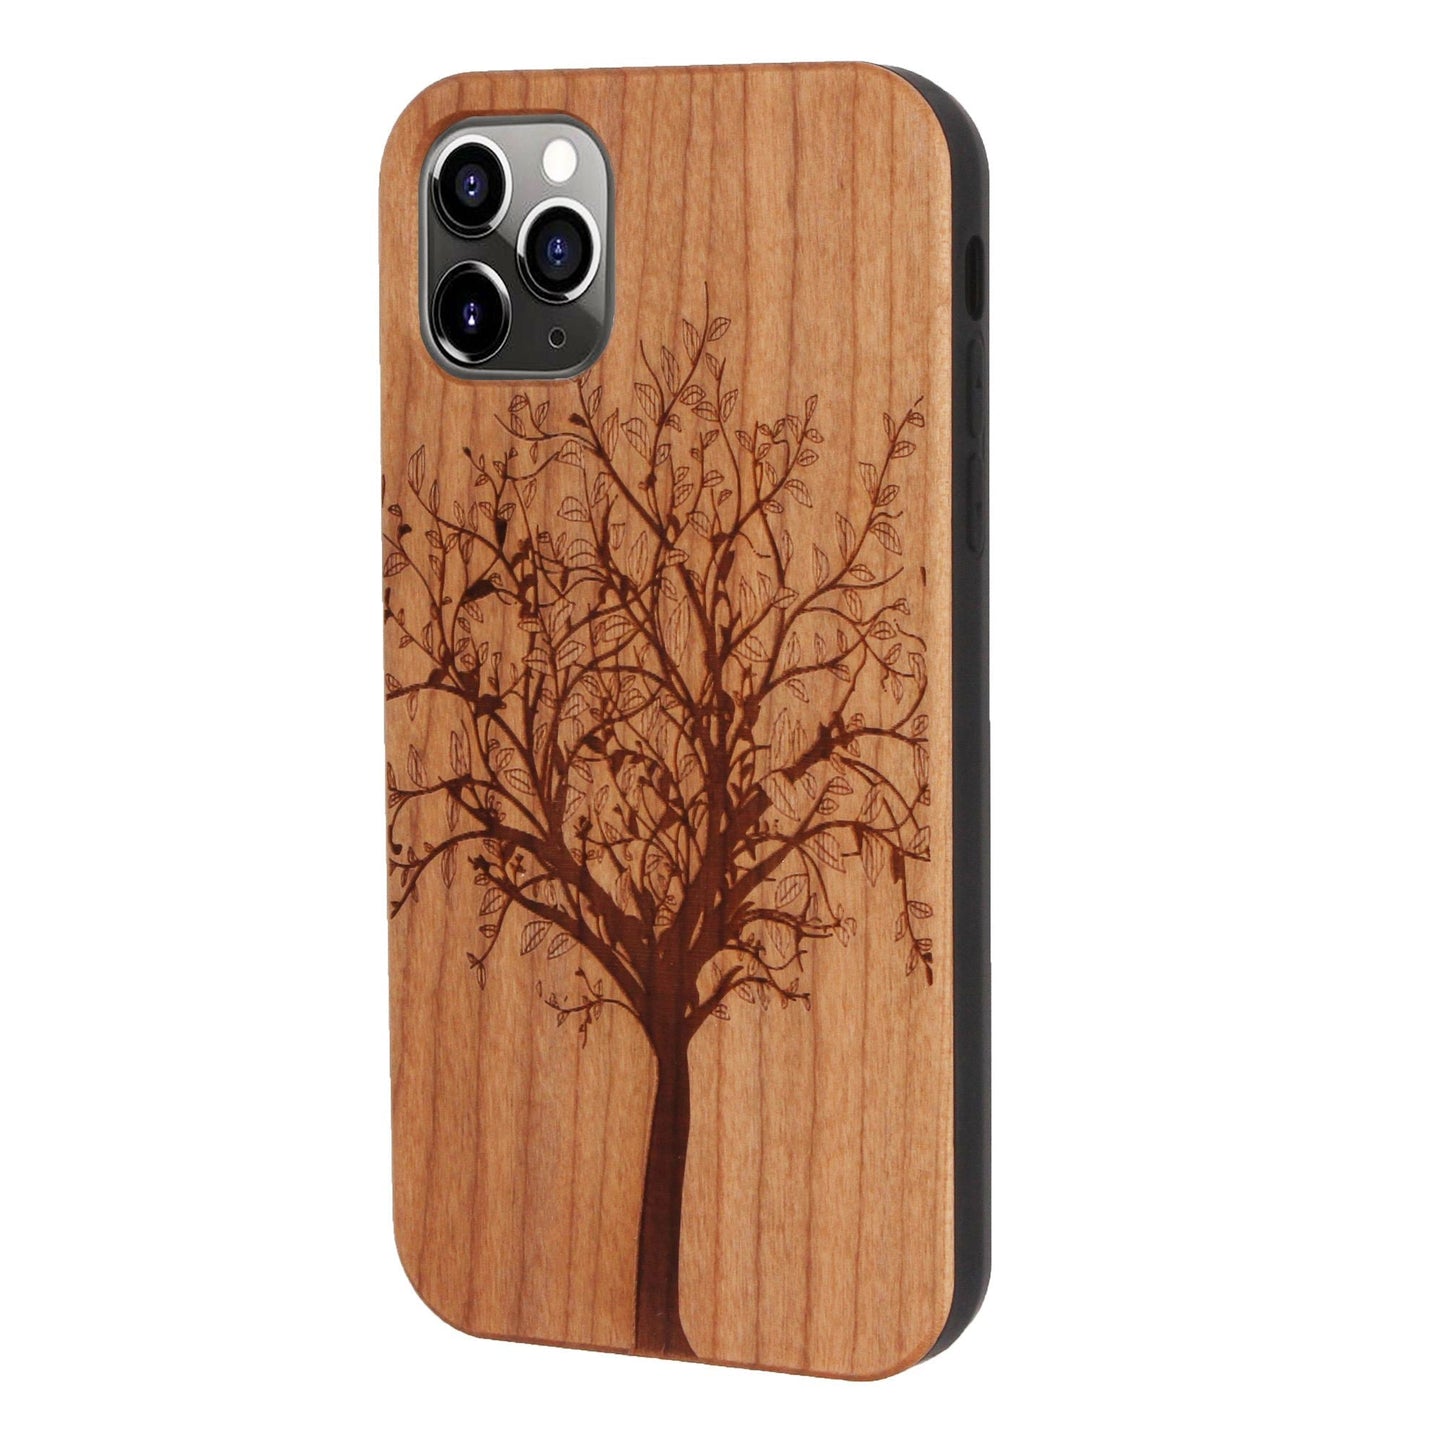 Tree of life Eden case made of cherry wood for iPhone 11 Pro Max